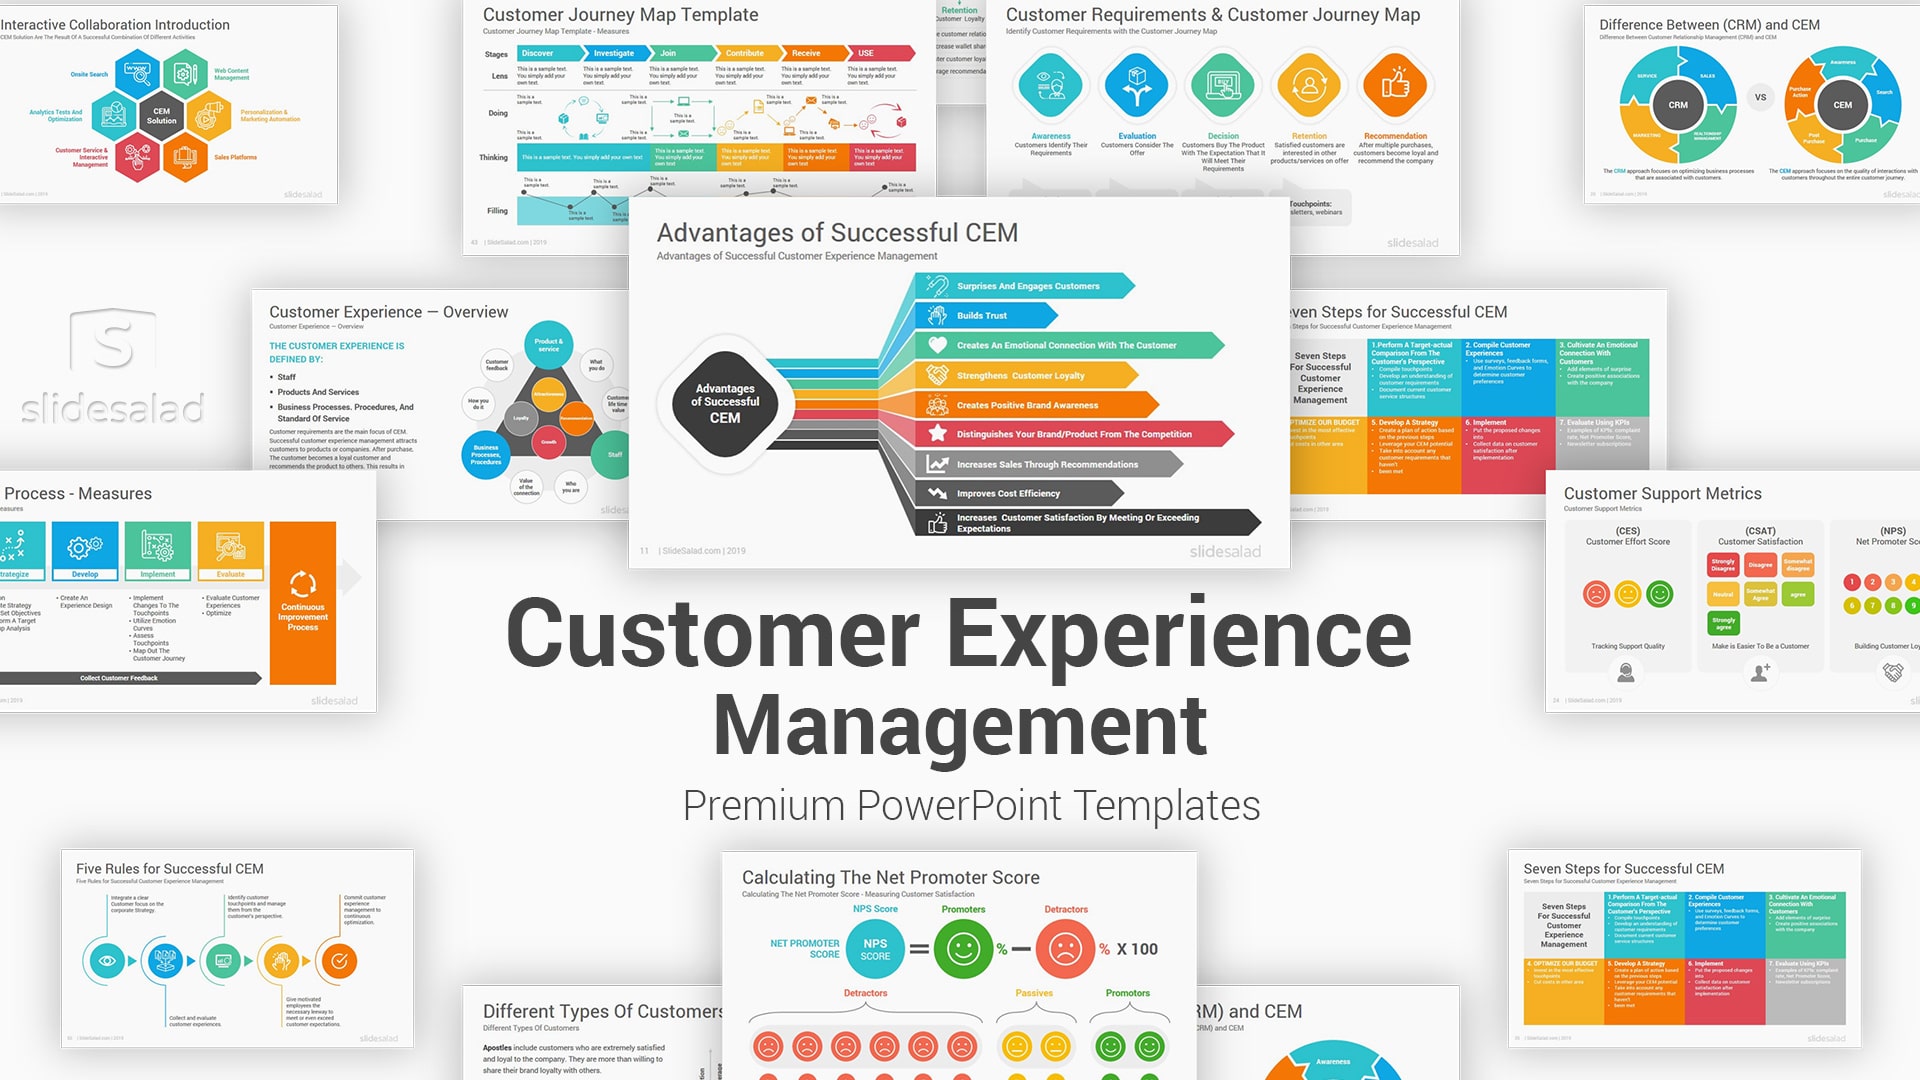 Customer Experience Management PowerPoint Templates Diagrams